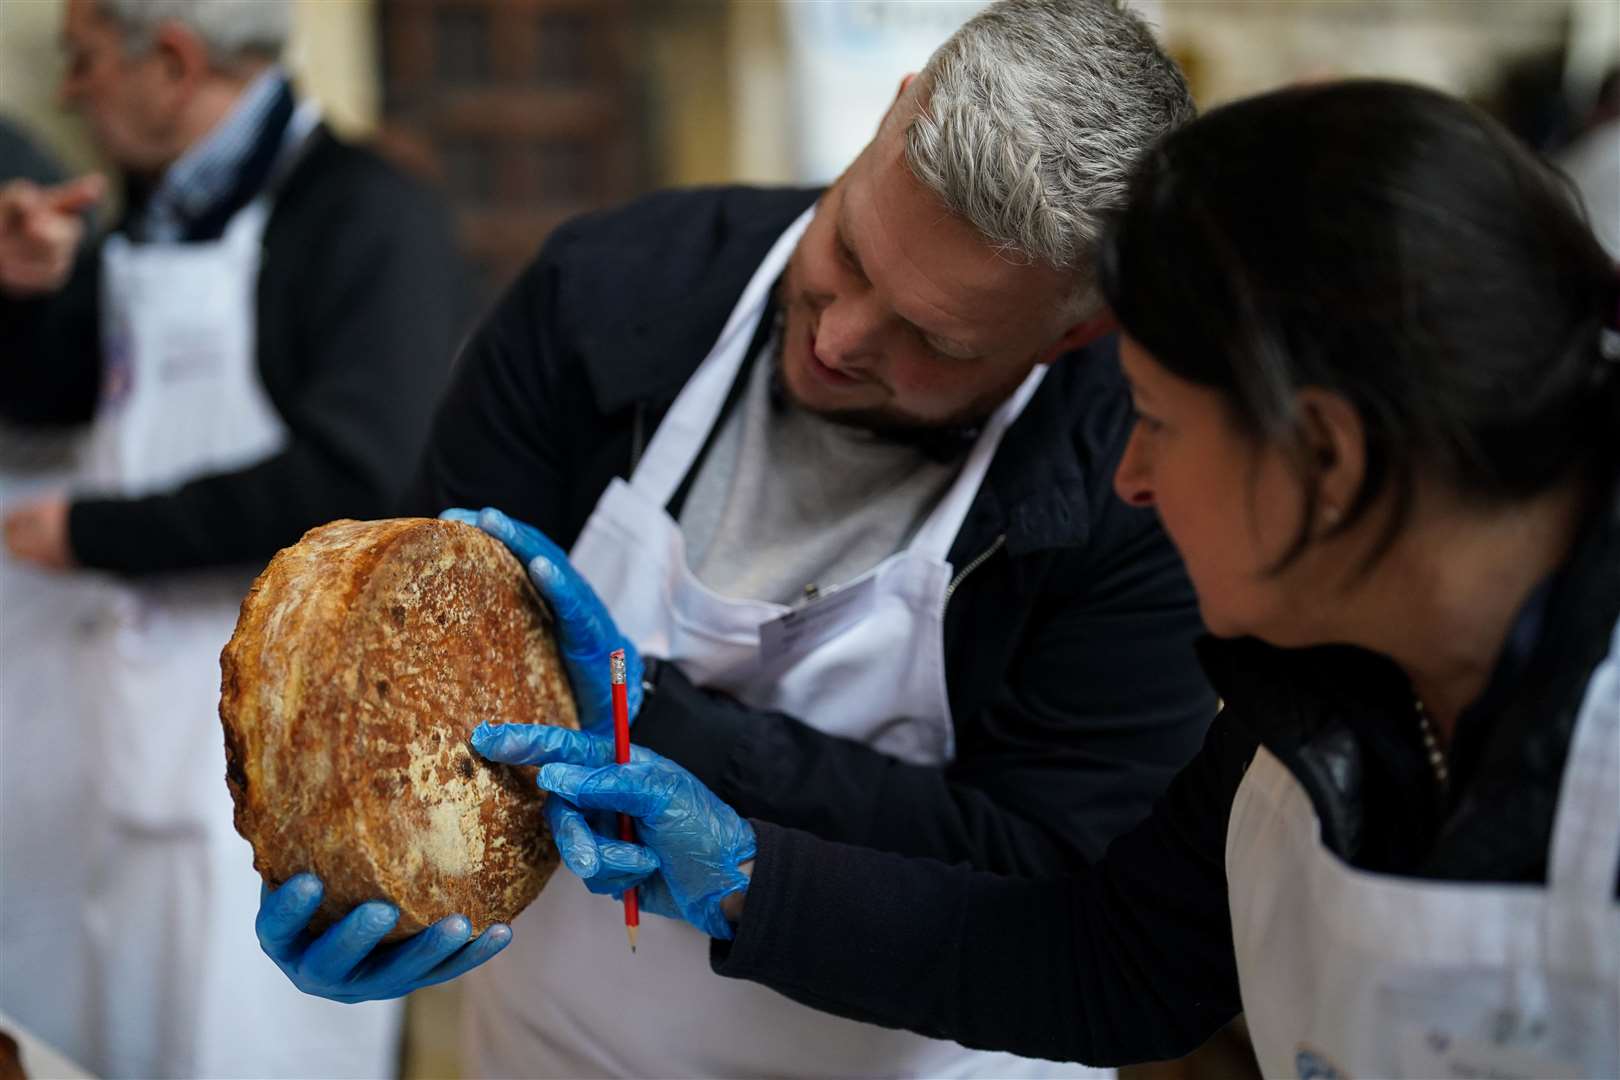 A pie being judged (Jacob King/PA)